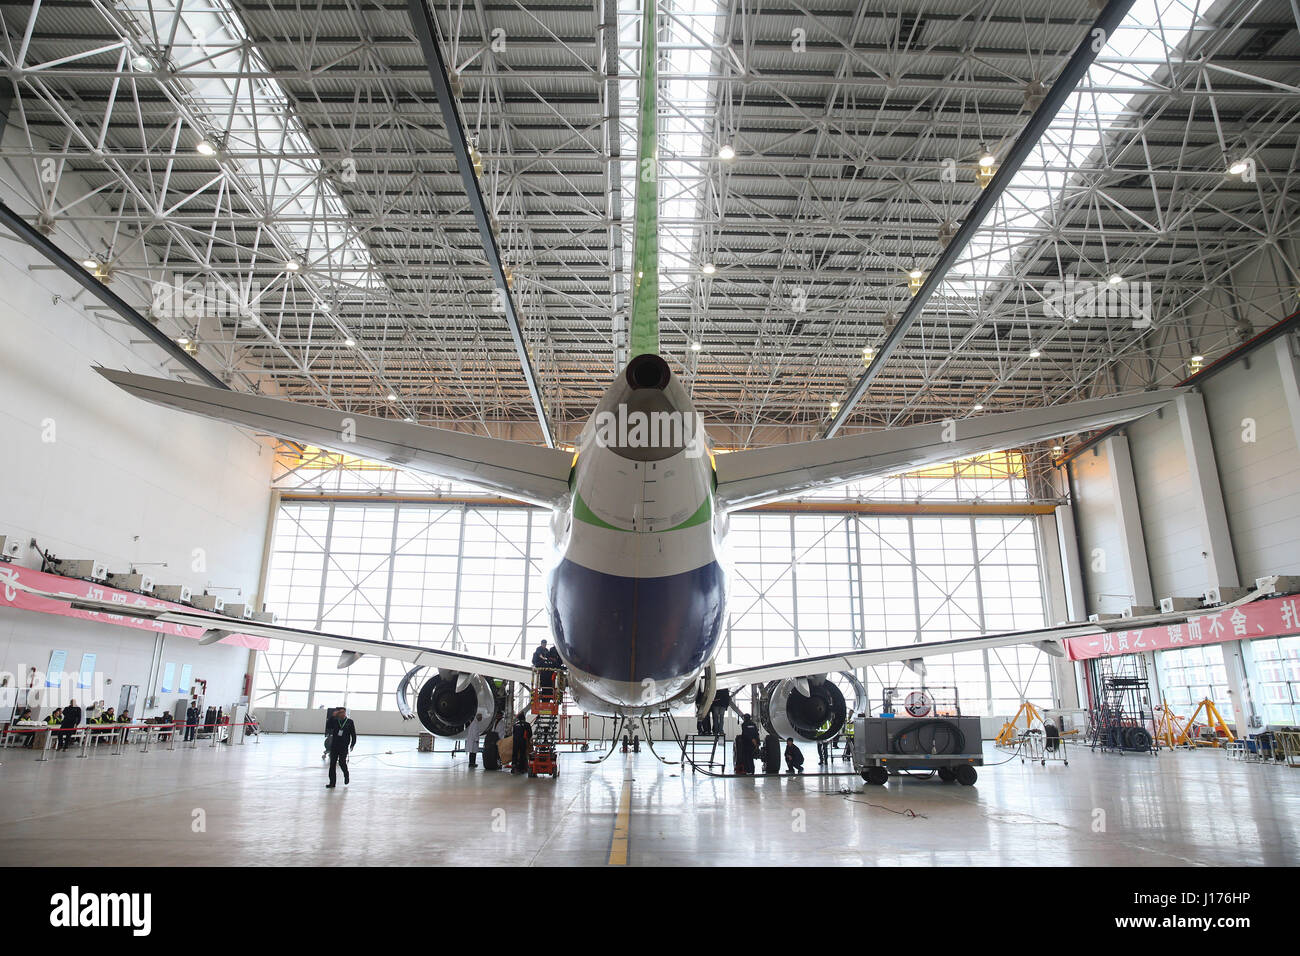 Shanghai. 11th Apr, 2017. Photo taken on April 11, 2017 shows a C919, the first large passenger aircraft designed and built by China, in a hangar in Shanghai, east China. The C919 passed the last expert assessment on Tuesday, its manufacturer announced. Credit: Ding Ting/Xinhua/Alamy Live News Stock Photo